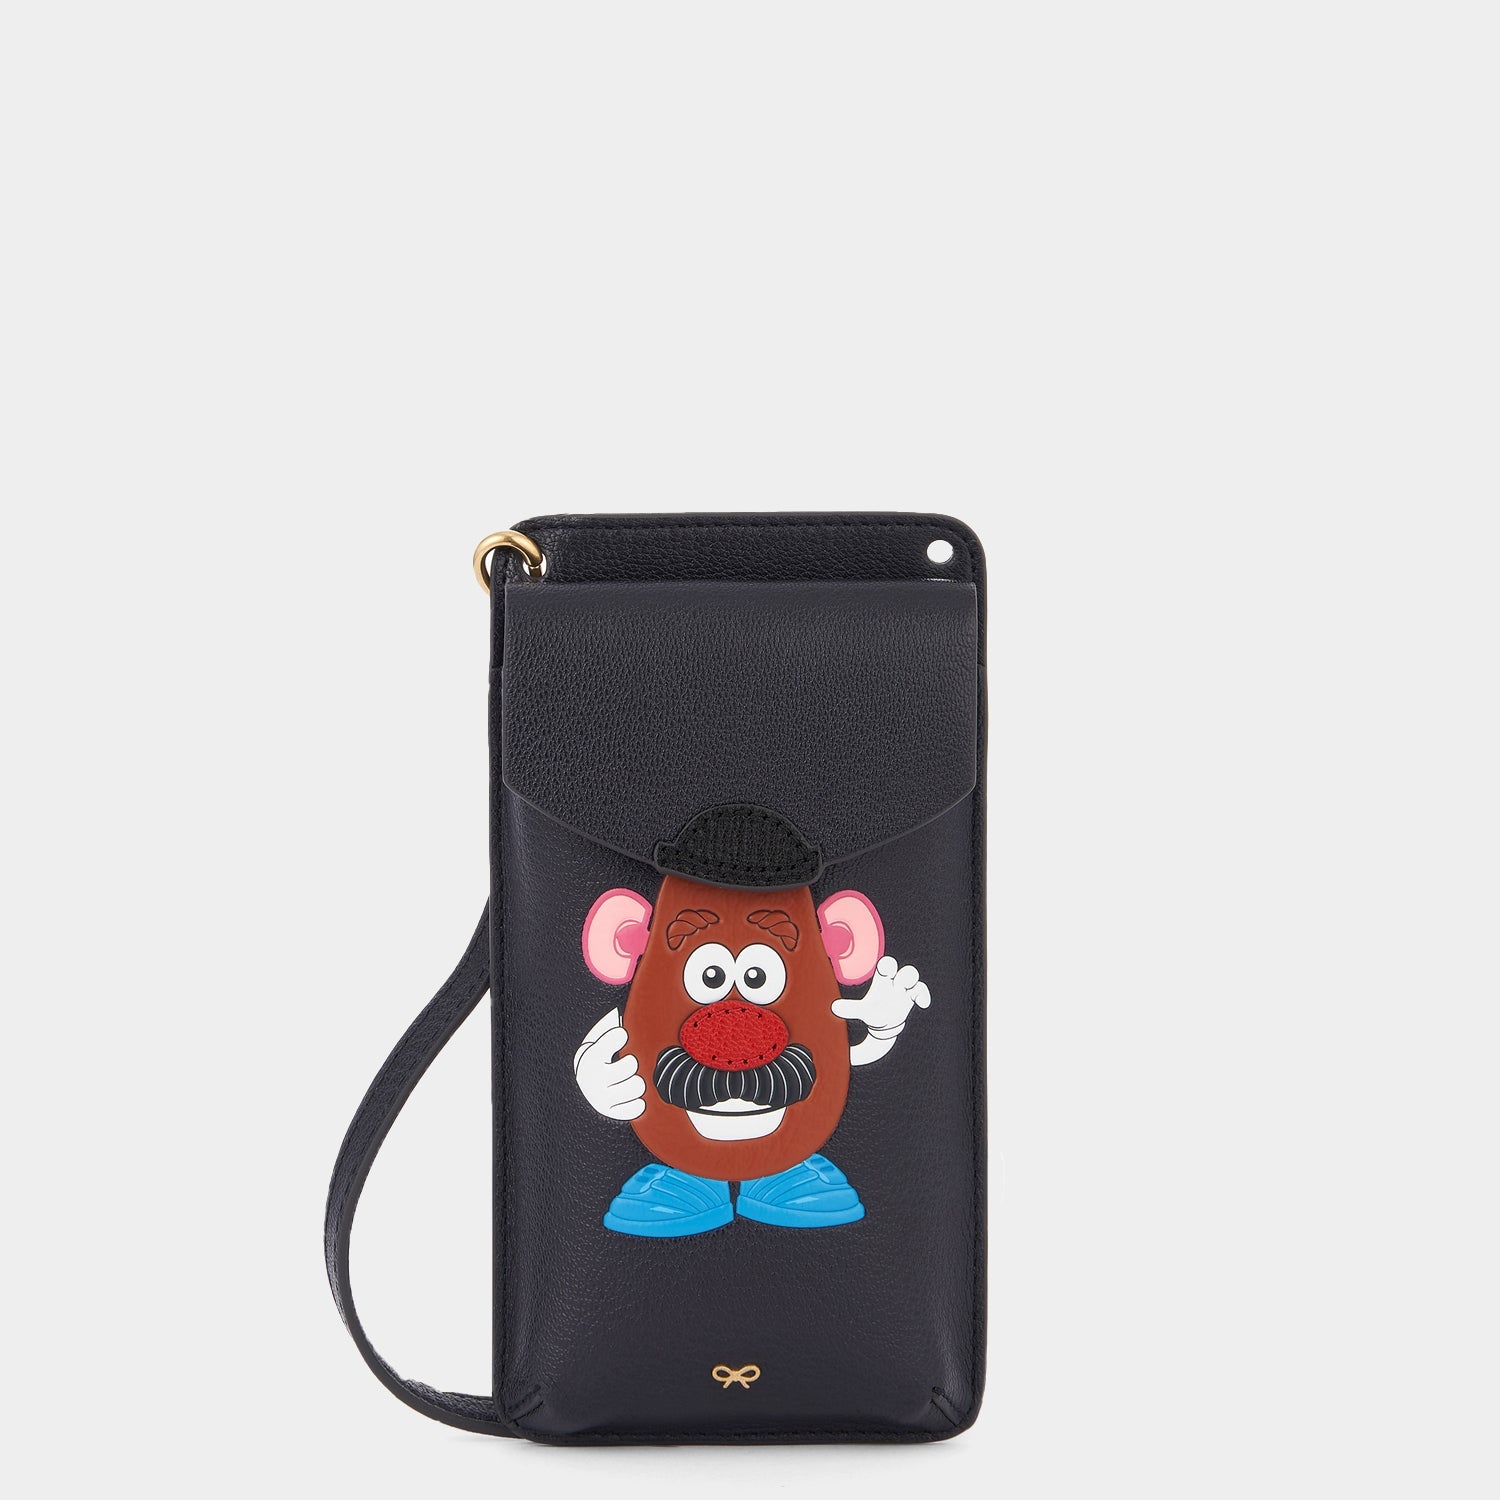 Mr Potato Head Phone Pouch on Strap | Anya Hindmarch US